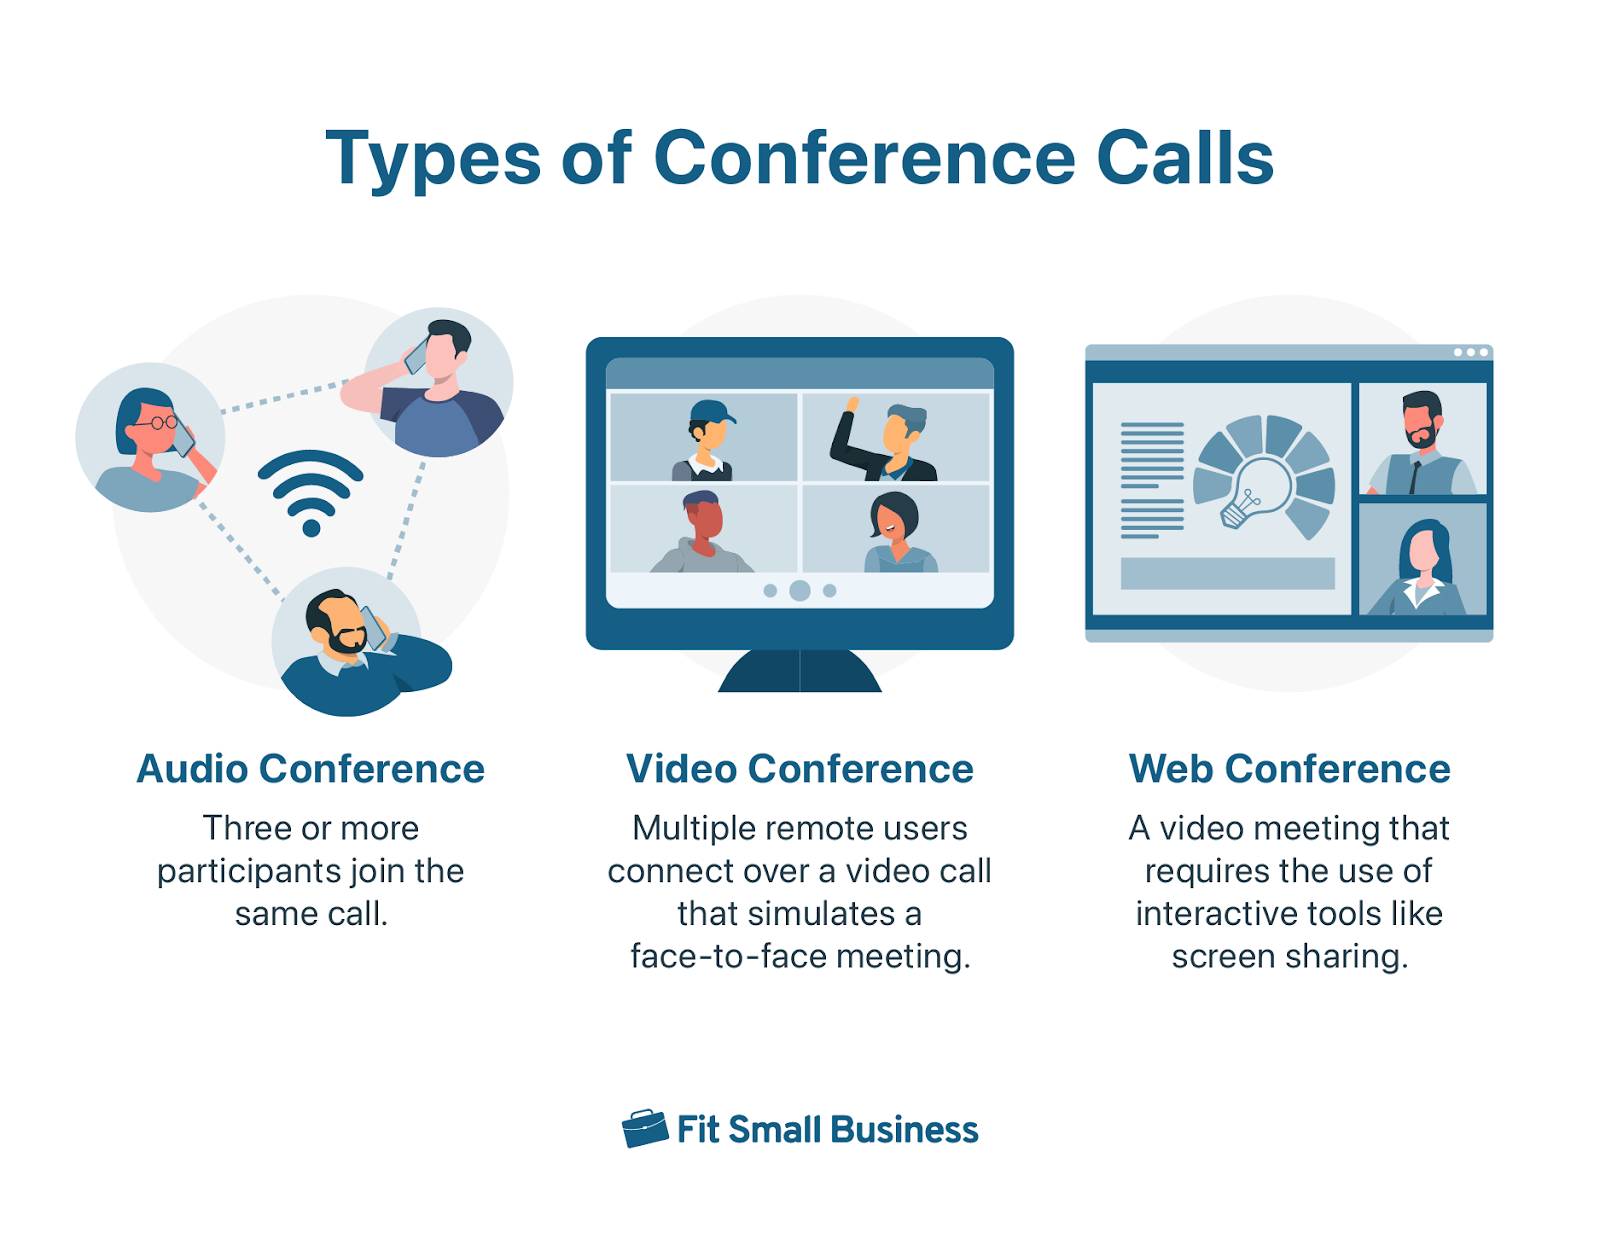 An infographic on three types of conference calls: audio, video, and web conferencing.